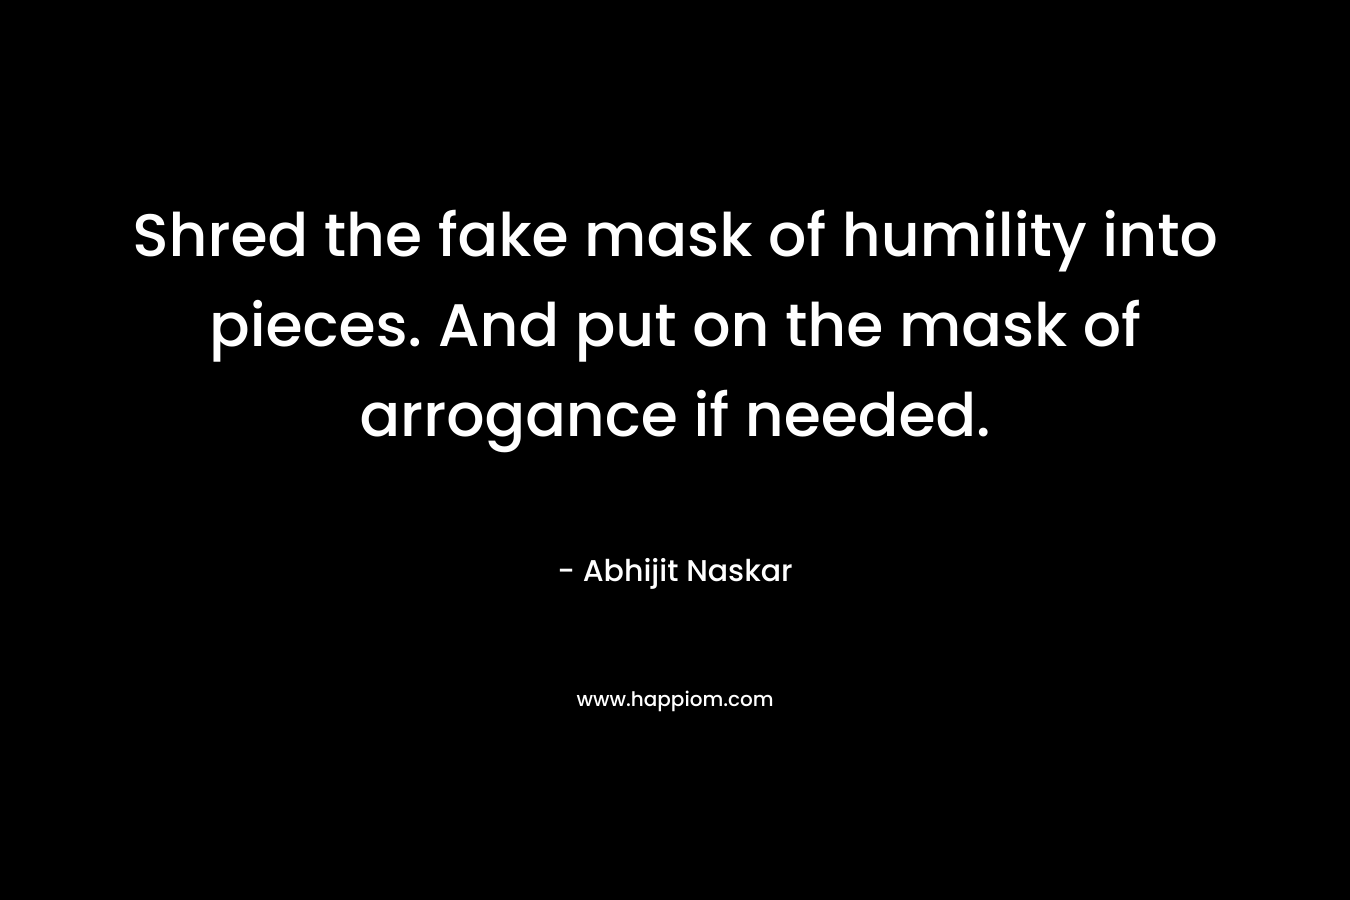 Shred the fake mask of humility into pieces. And put on the mask of arrogance if needed.